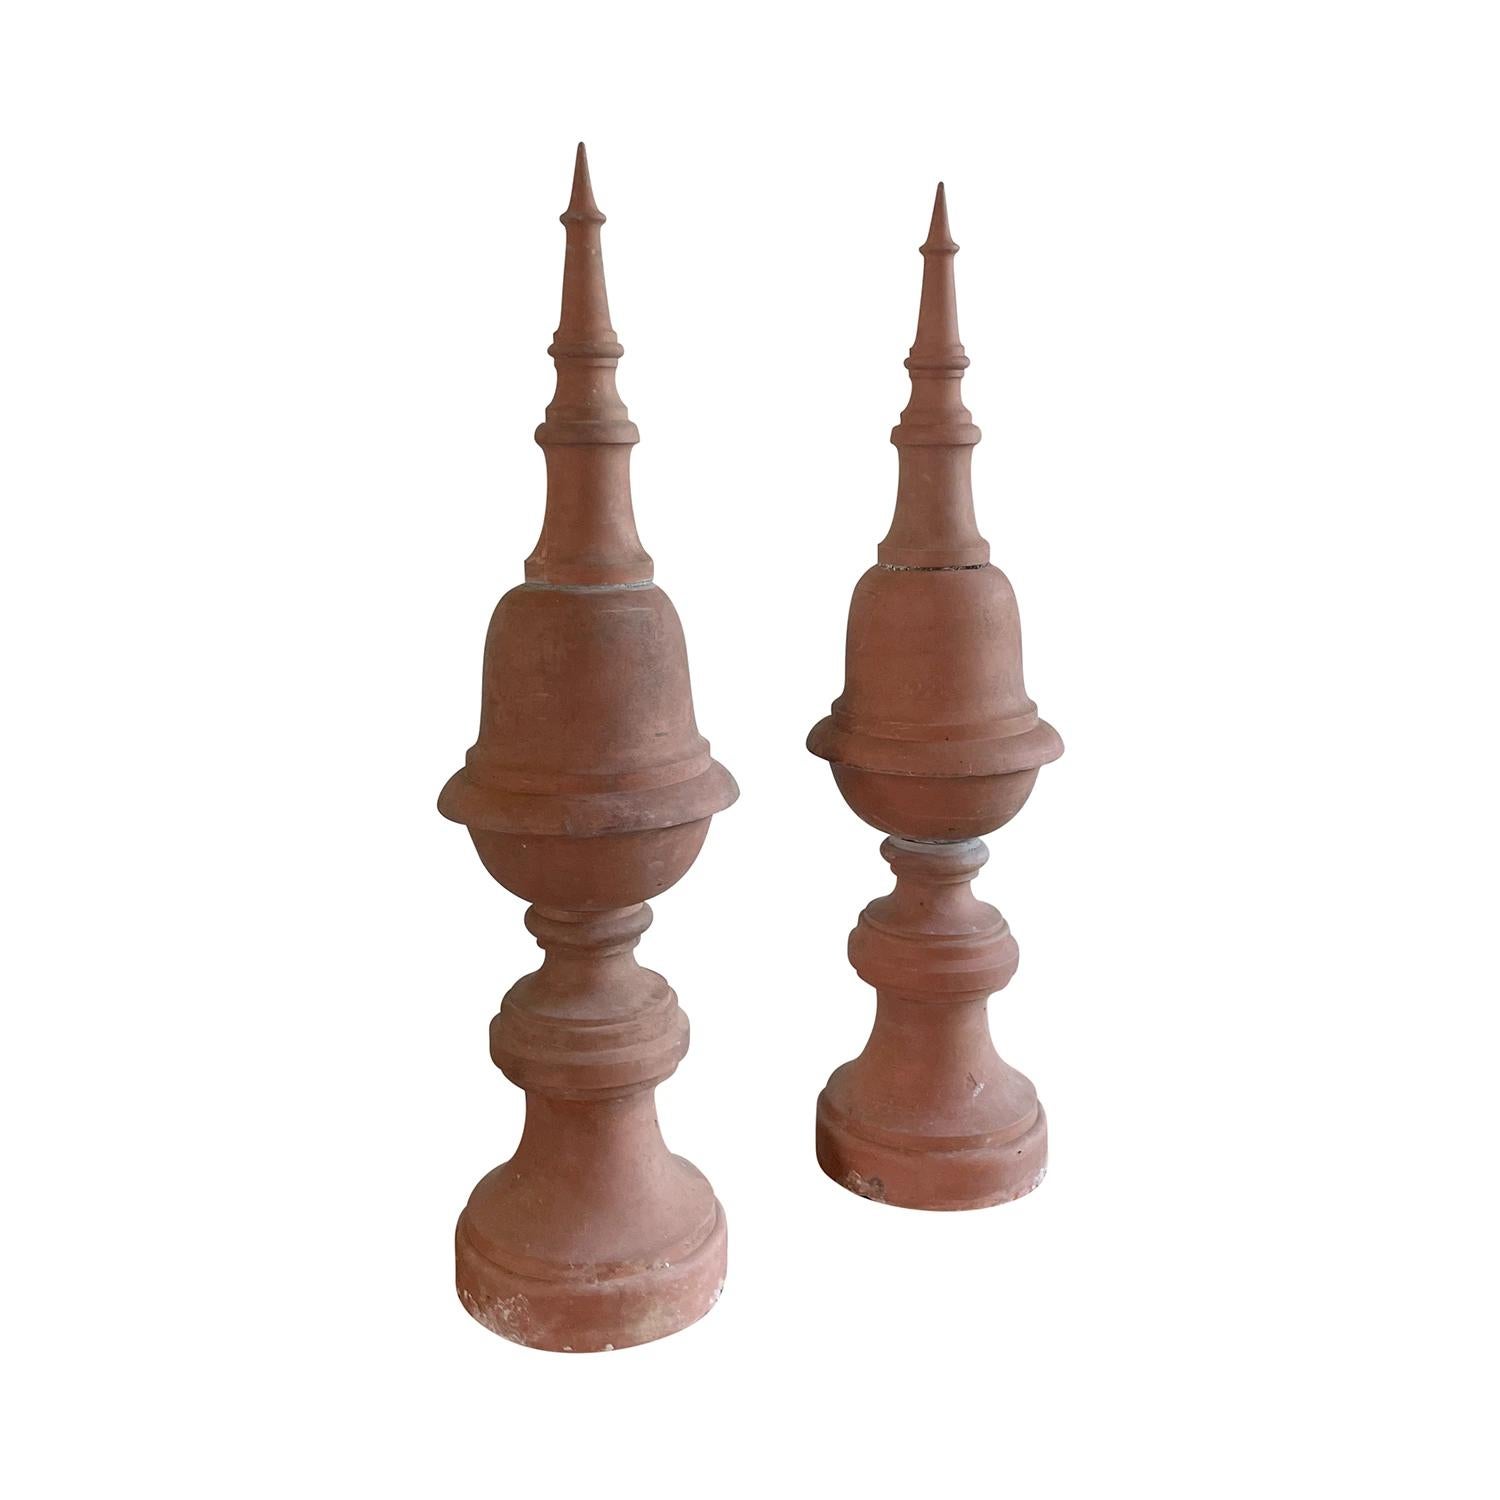 An antique pair of 17th Century French garden ornaments made of hand crafted terra cotta clay. These finials have turned pointed finial tops and are raised onto a circular base with a stamp of 